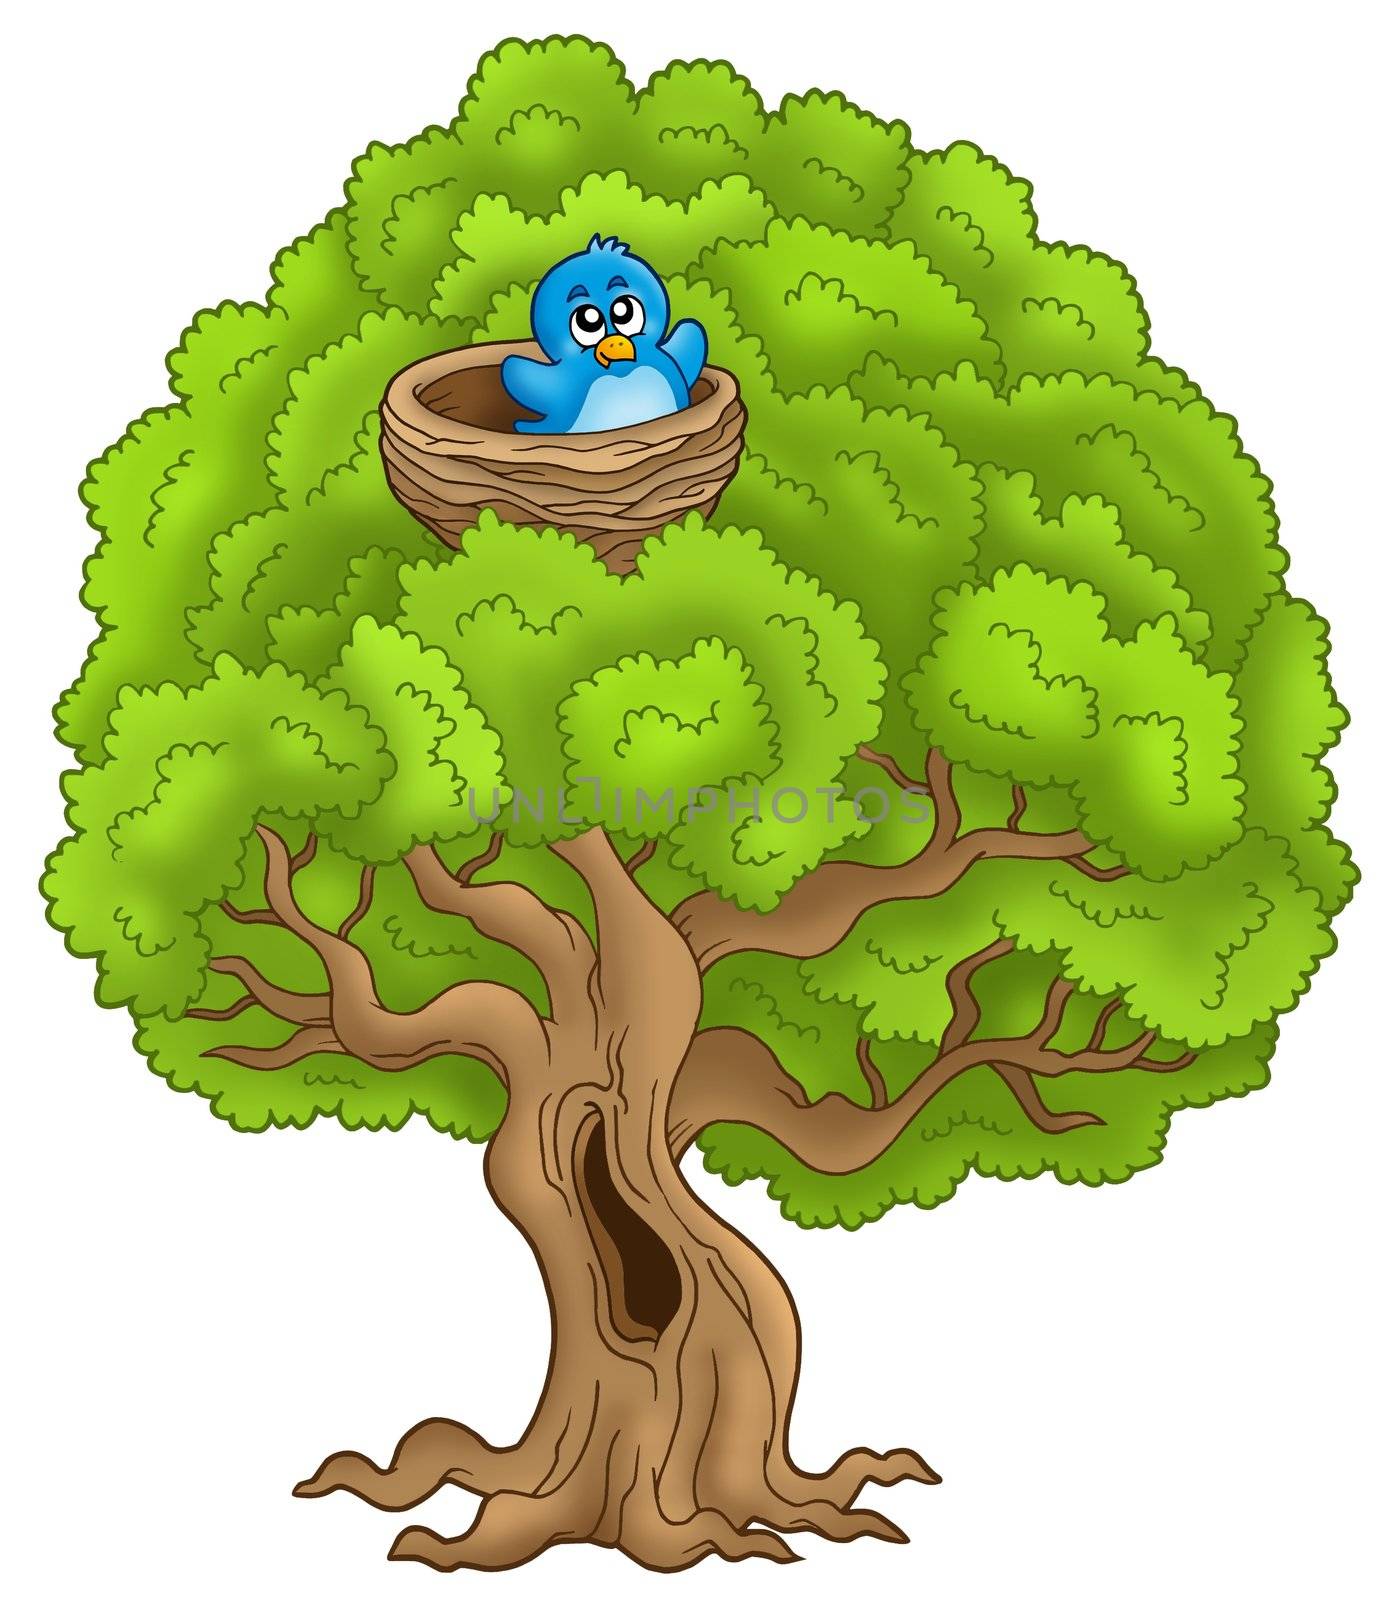 Big tree with blue bird in nest by clairev